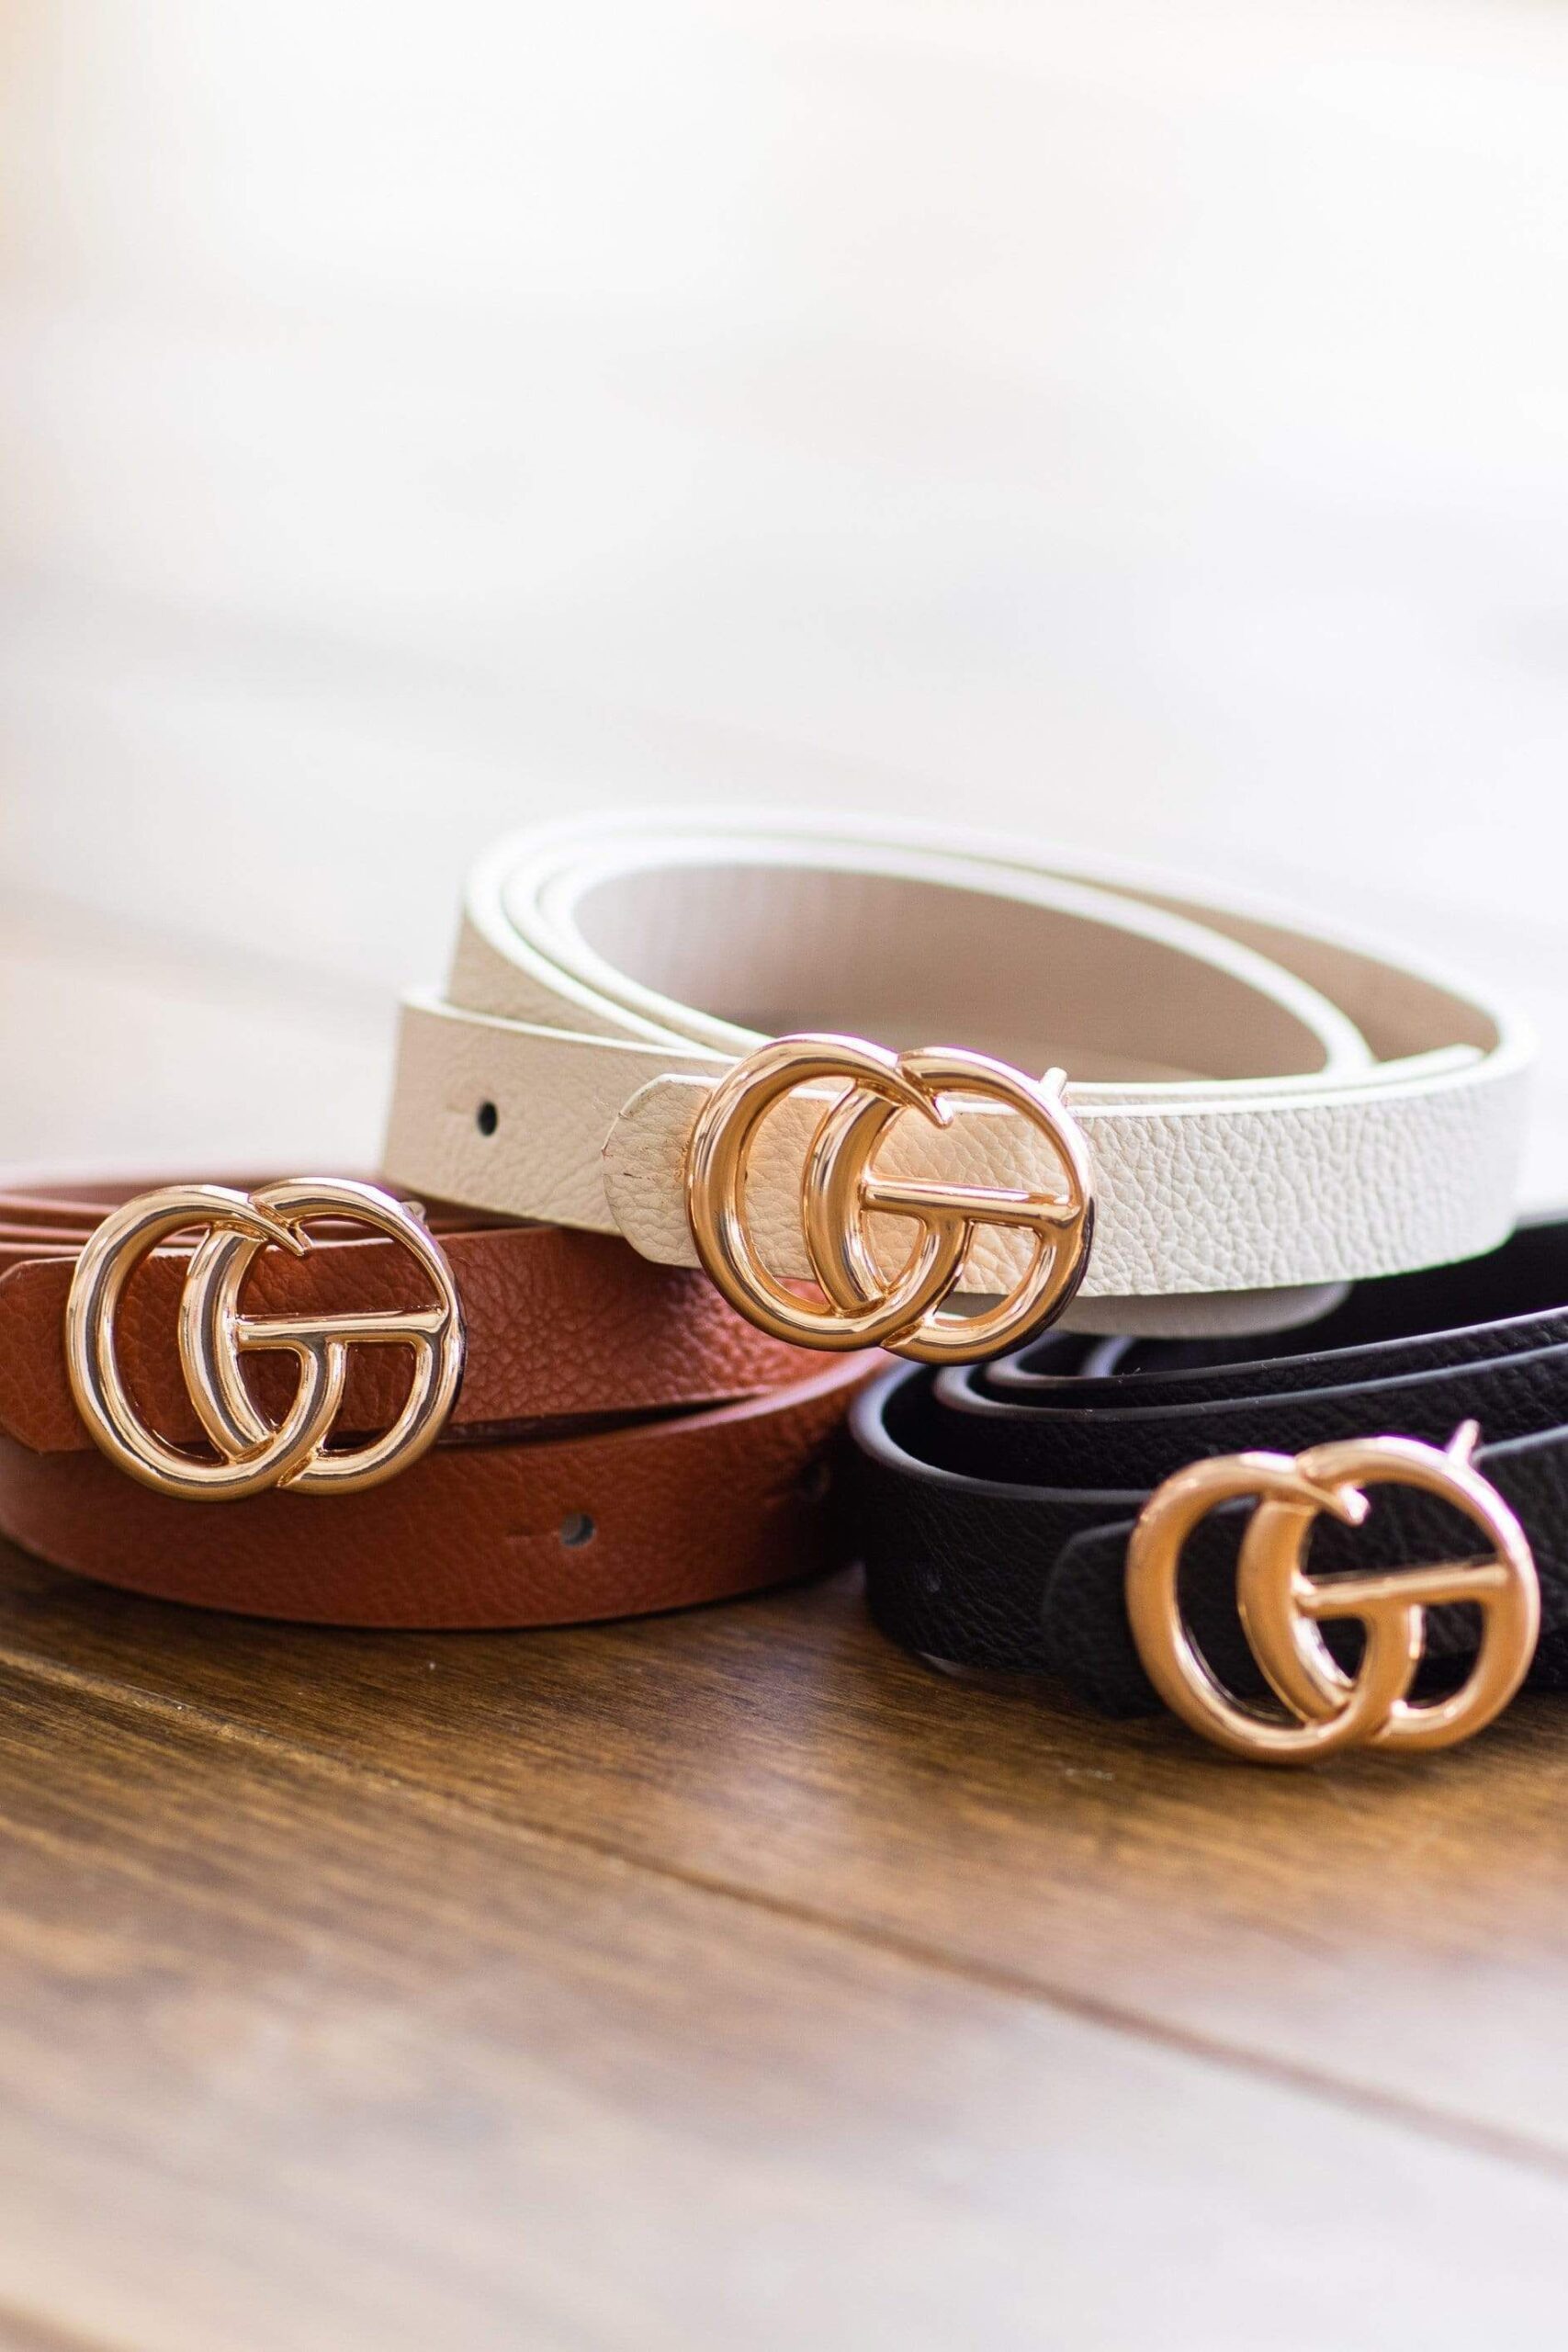 Belts For Women: Versatile and Stylish Accessories for Every Outfit